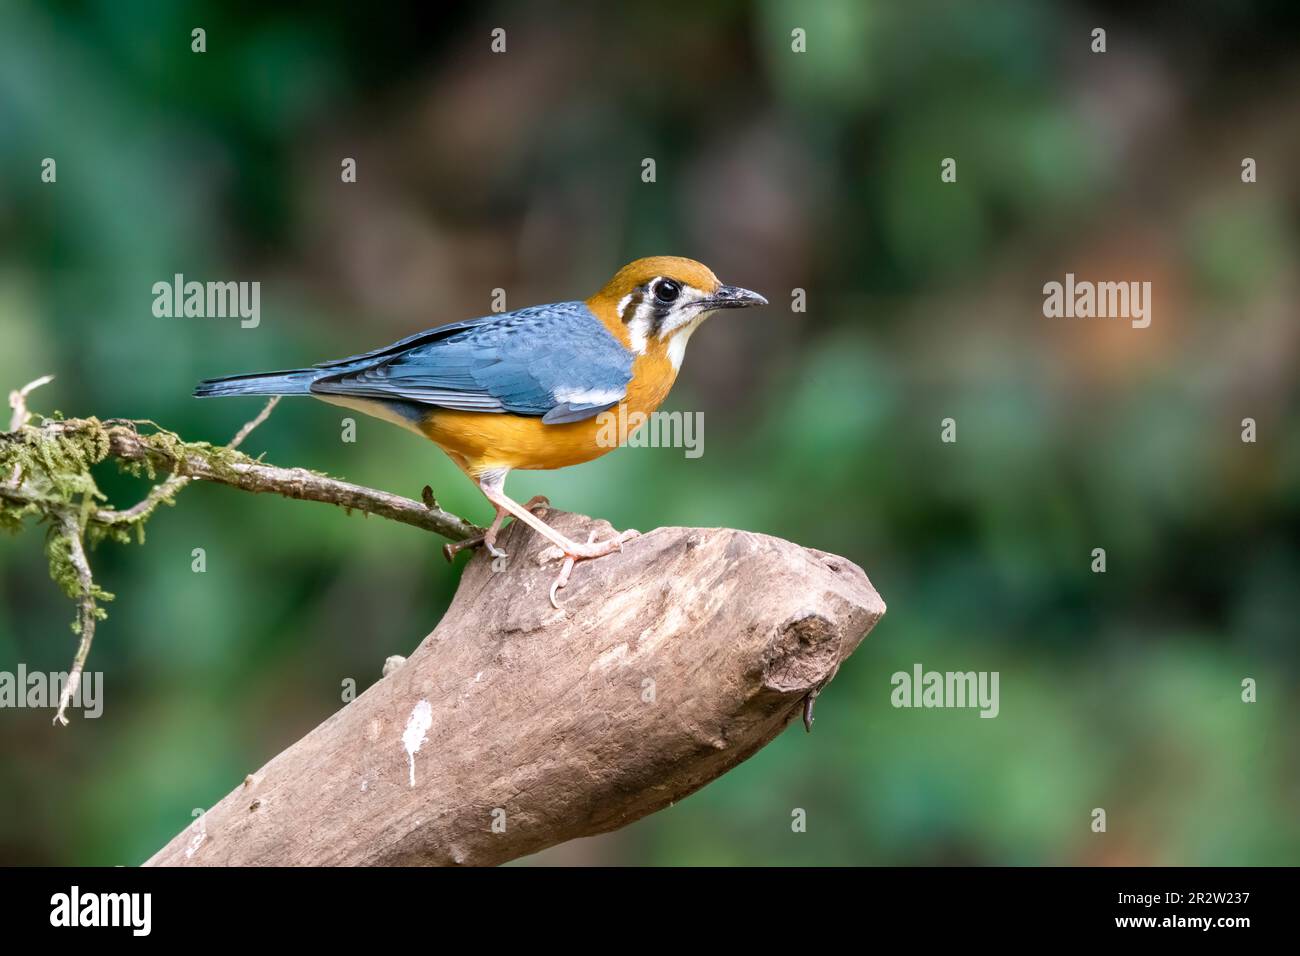 An orange-headed thrush sitting on a platform feeding on insects in the outskirts of Thattekad, Kerala Stock Photo